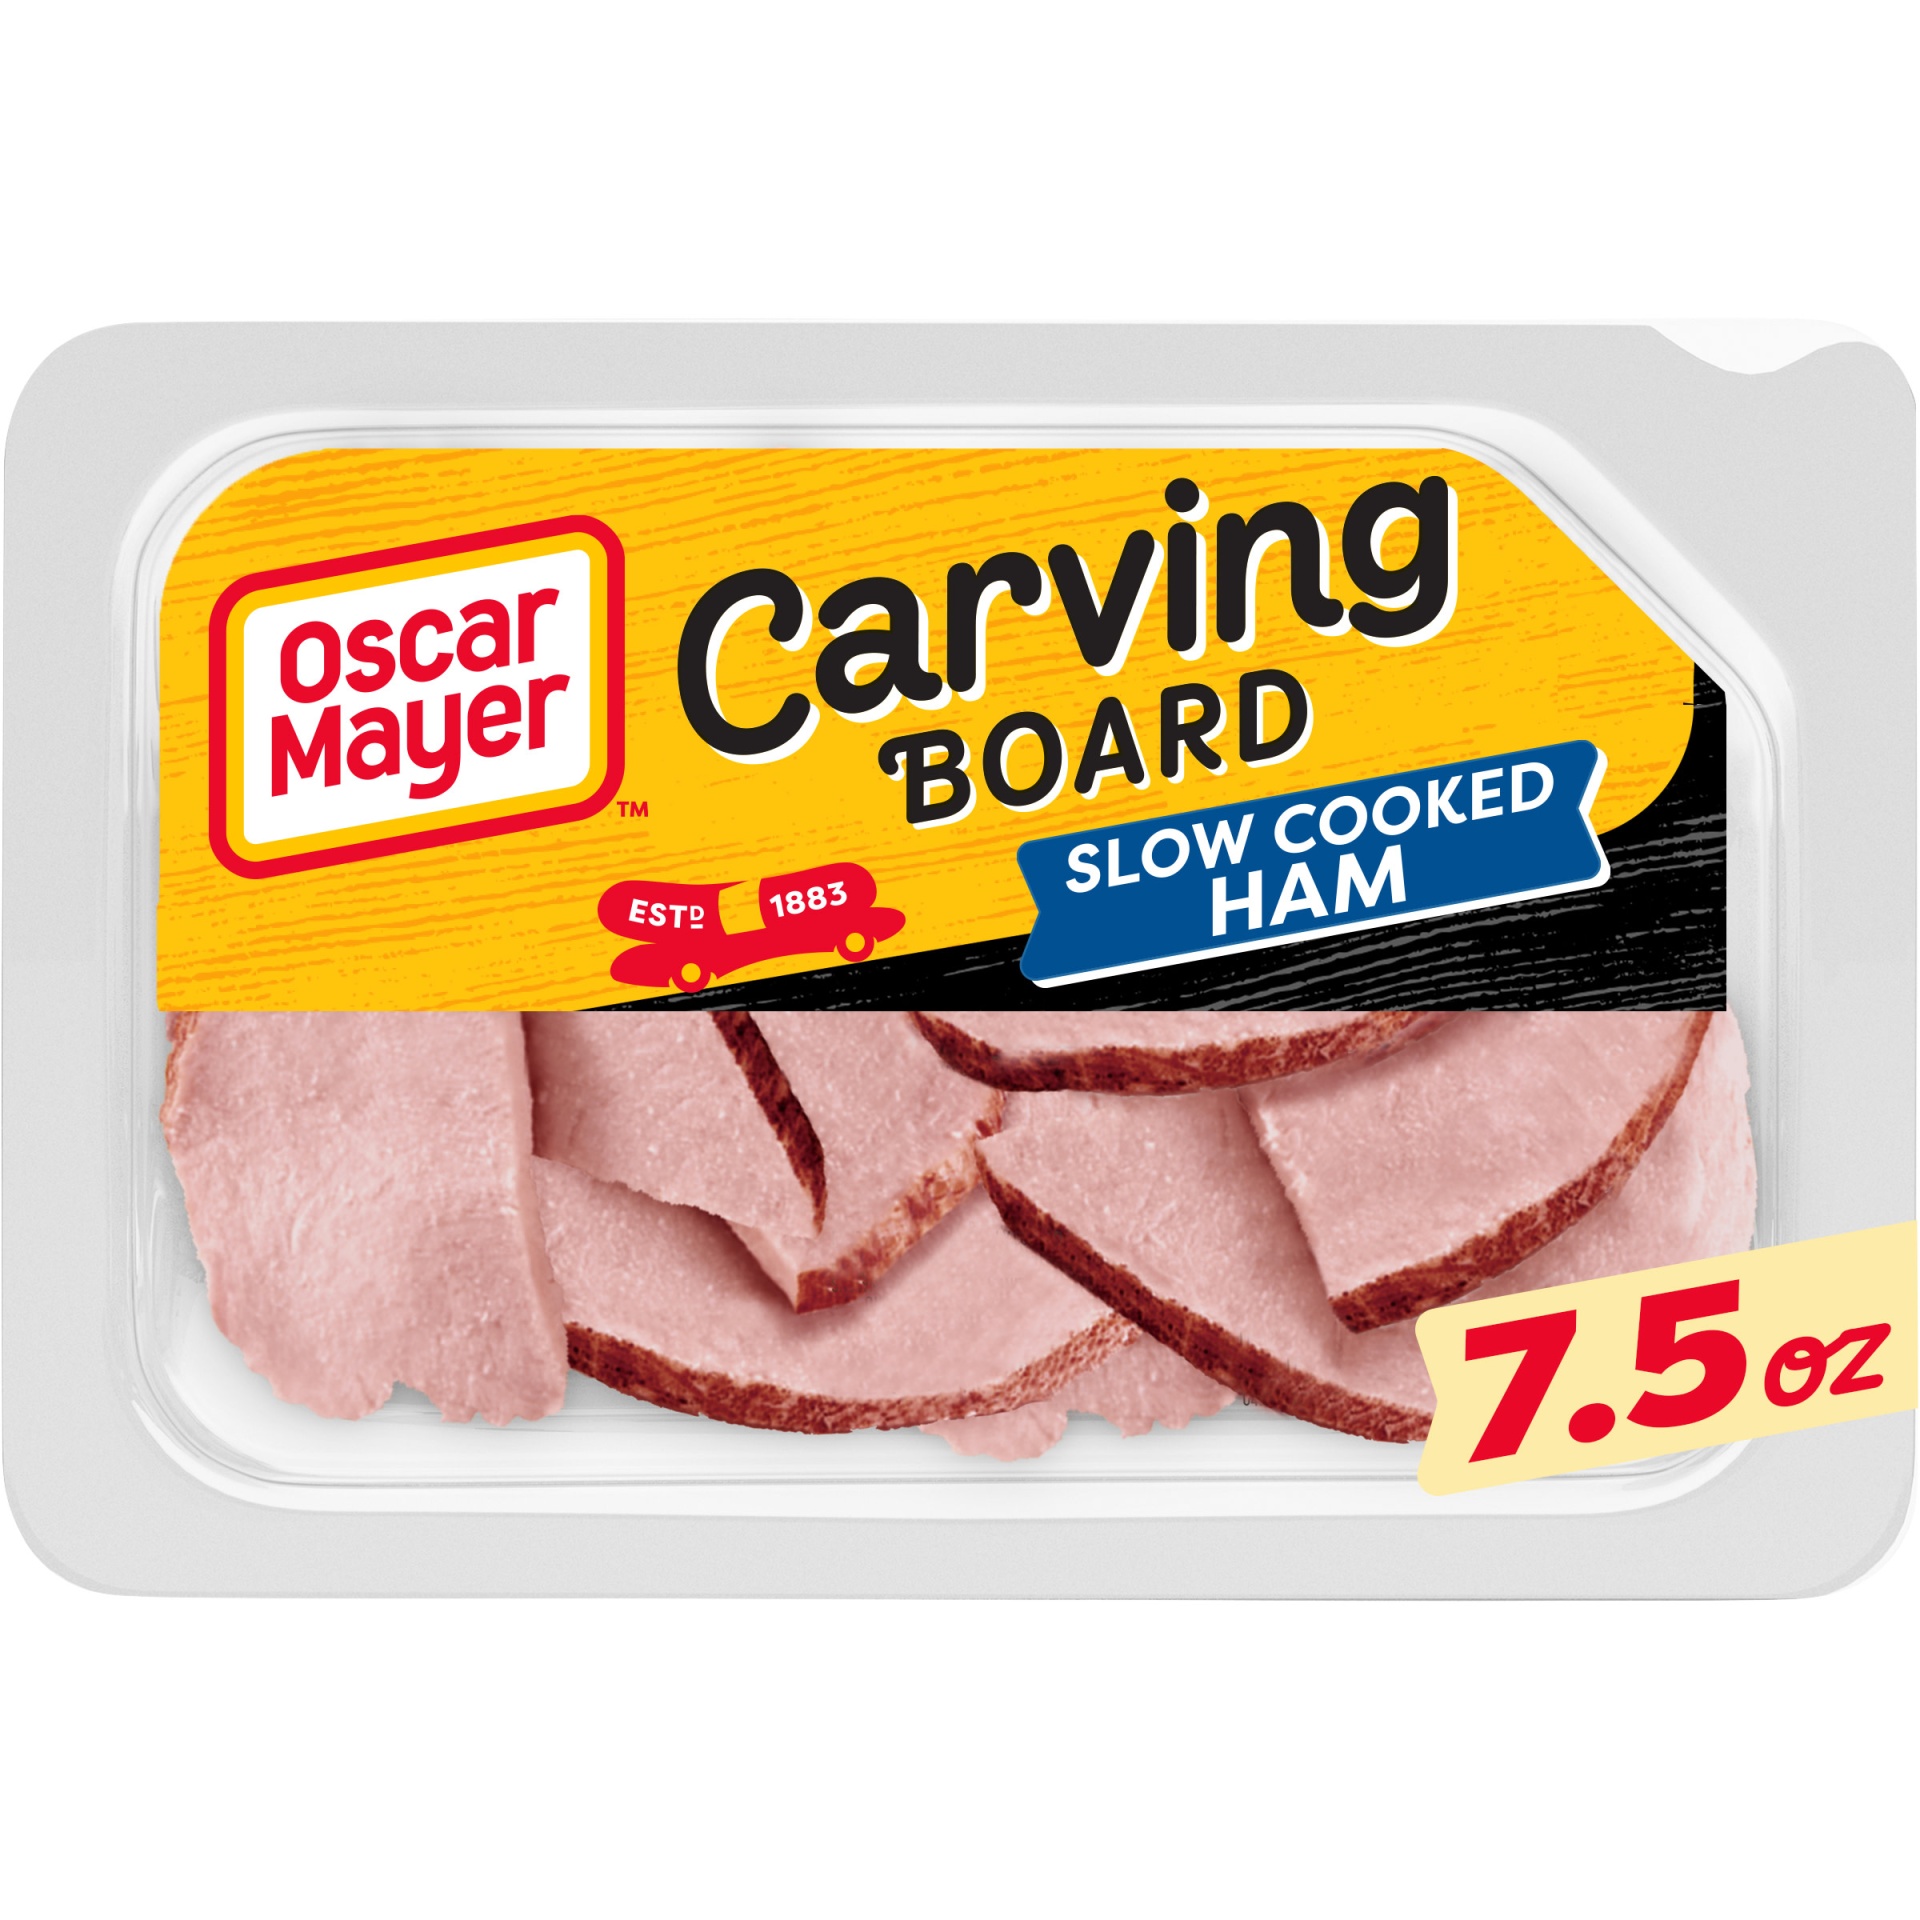 slide 1 of 2, Oscar Mayer Carving Board Slow Cooked Ham Sliced Lunch Meat Tray, 7.5 oz